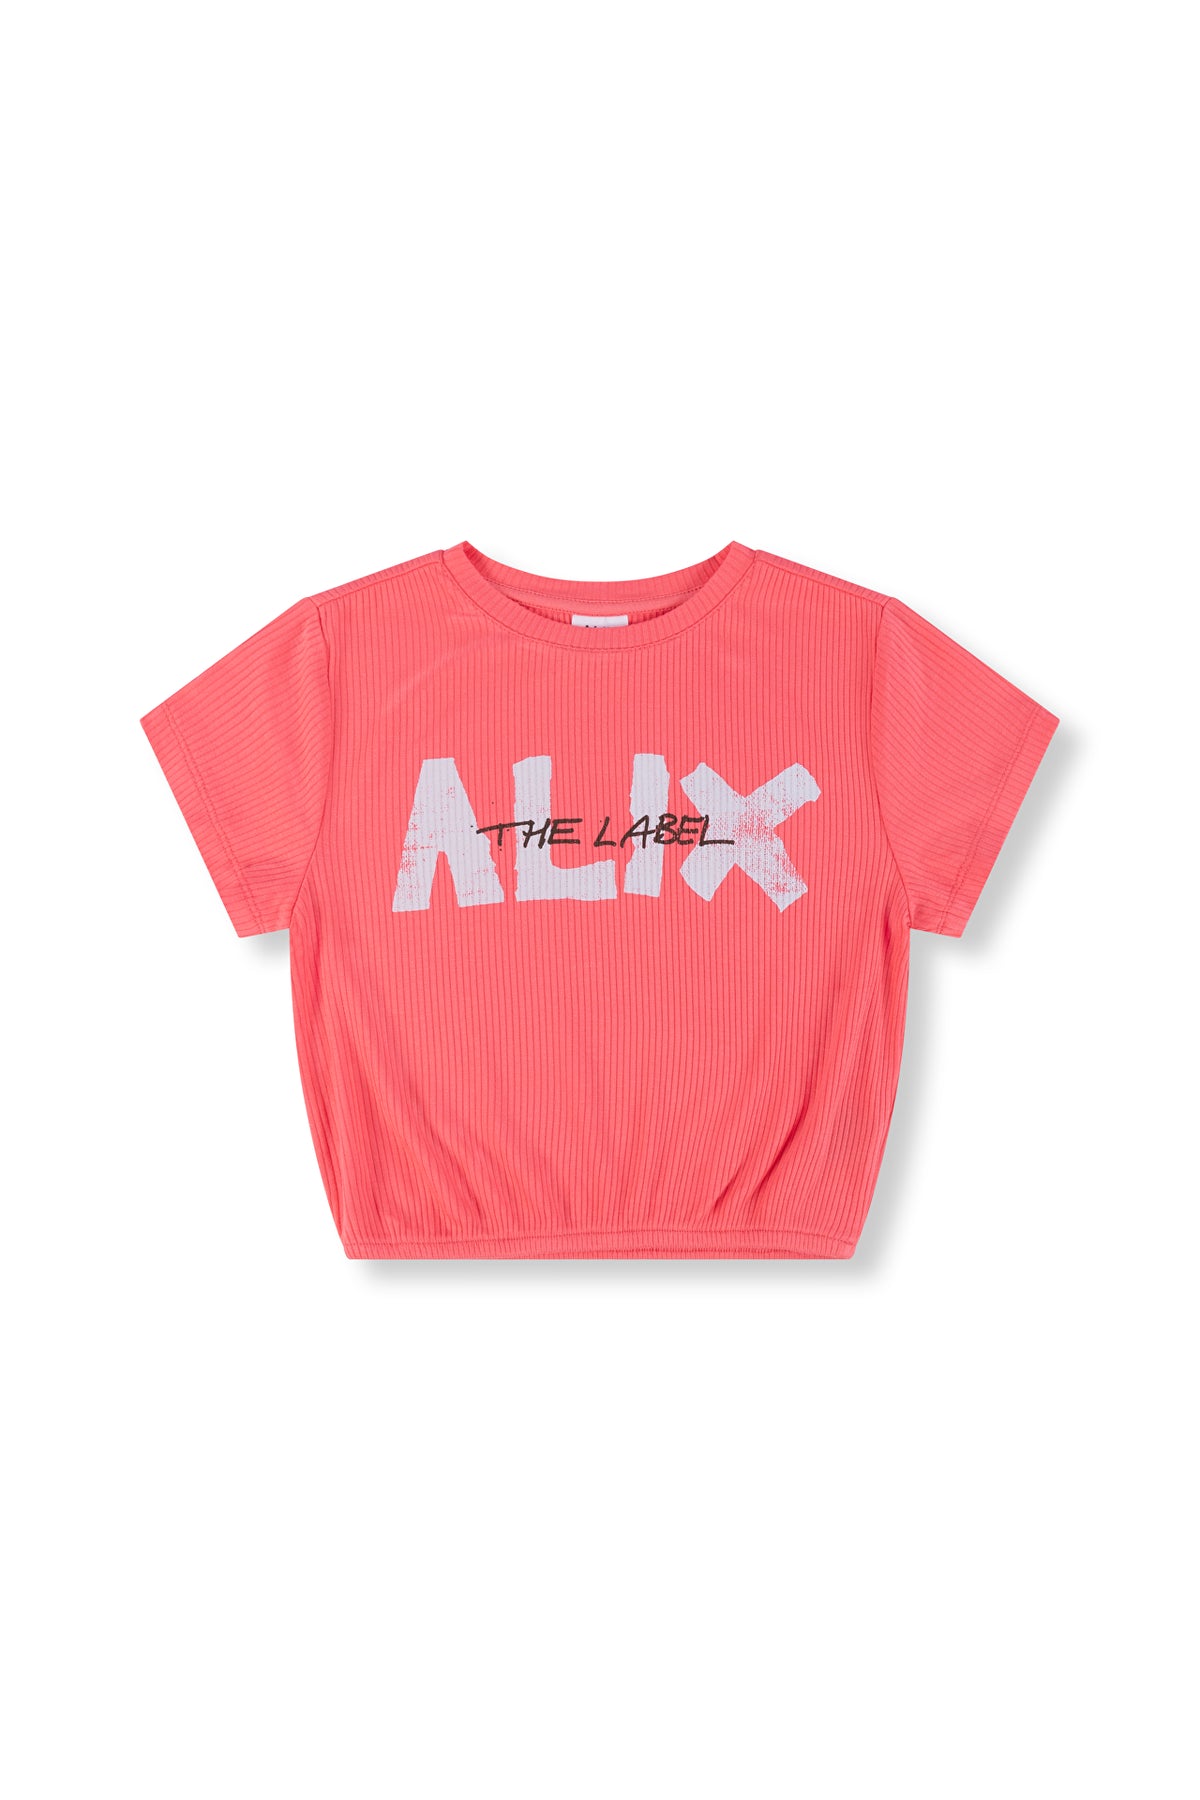 Alix Cropped t-shirt intense coral, Alix the label